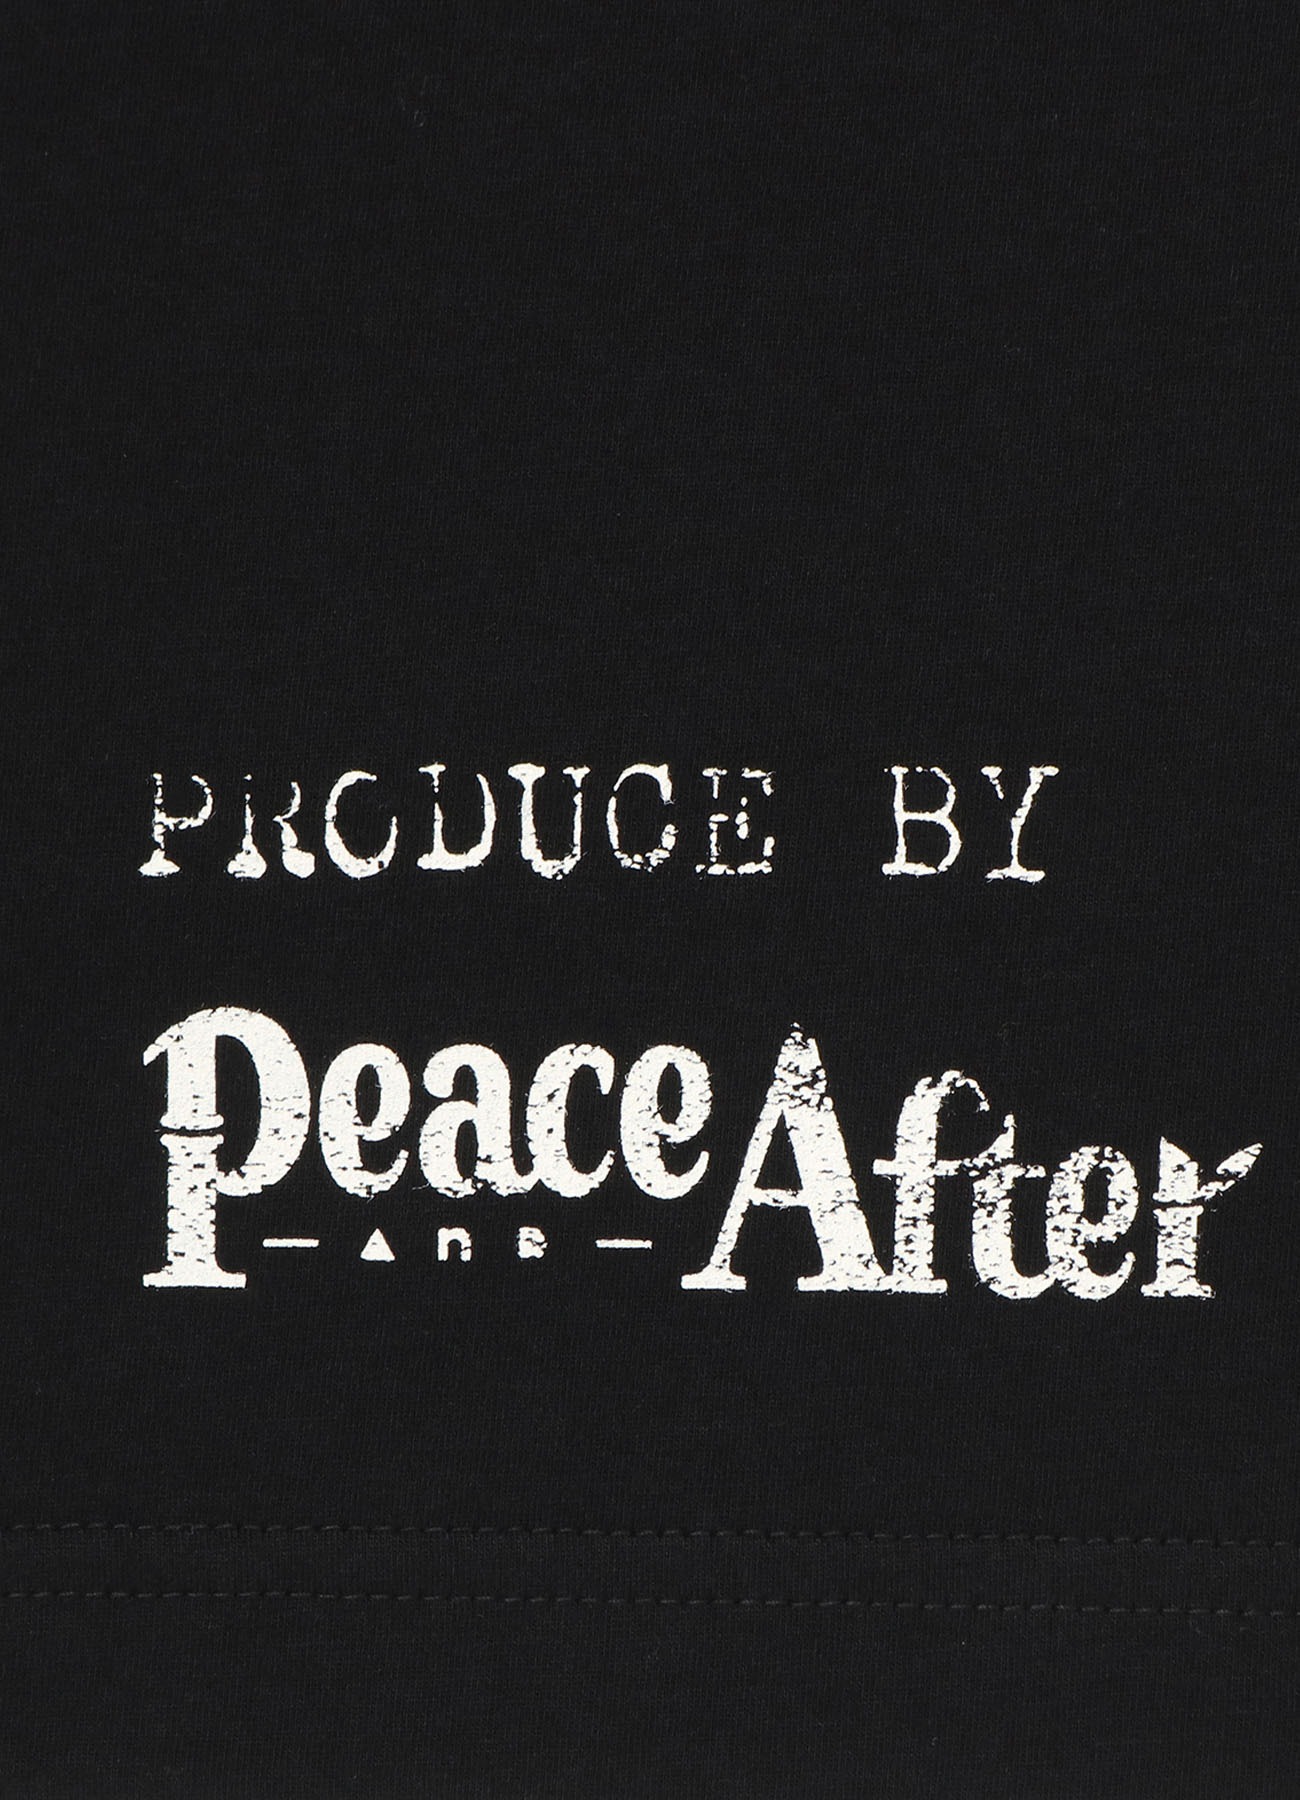 Yohji Yamamoto Black Scandal｜PEACE AND AFTER MESSAGE PRINT ROUND NECK HALF SLEEVES TEE HG-T36-993-1 US＄270